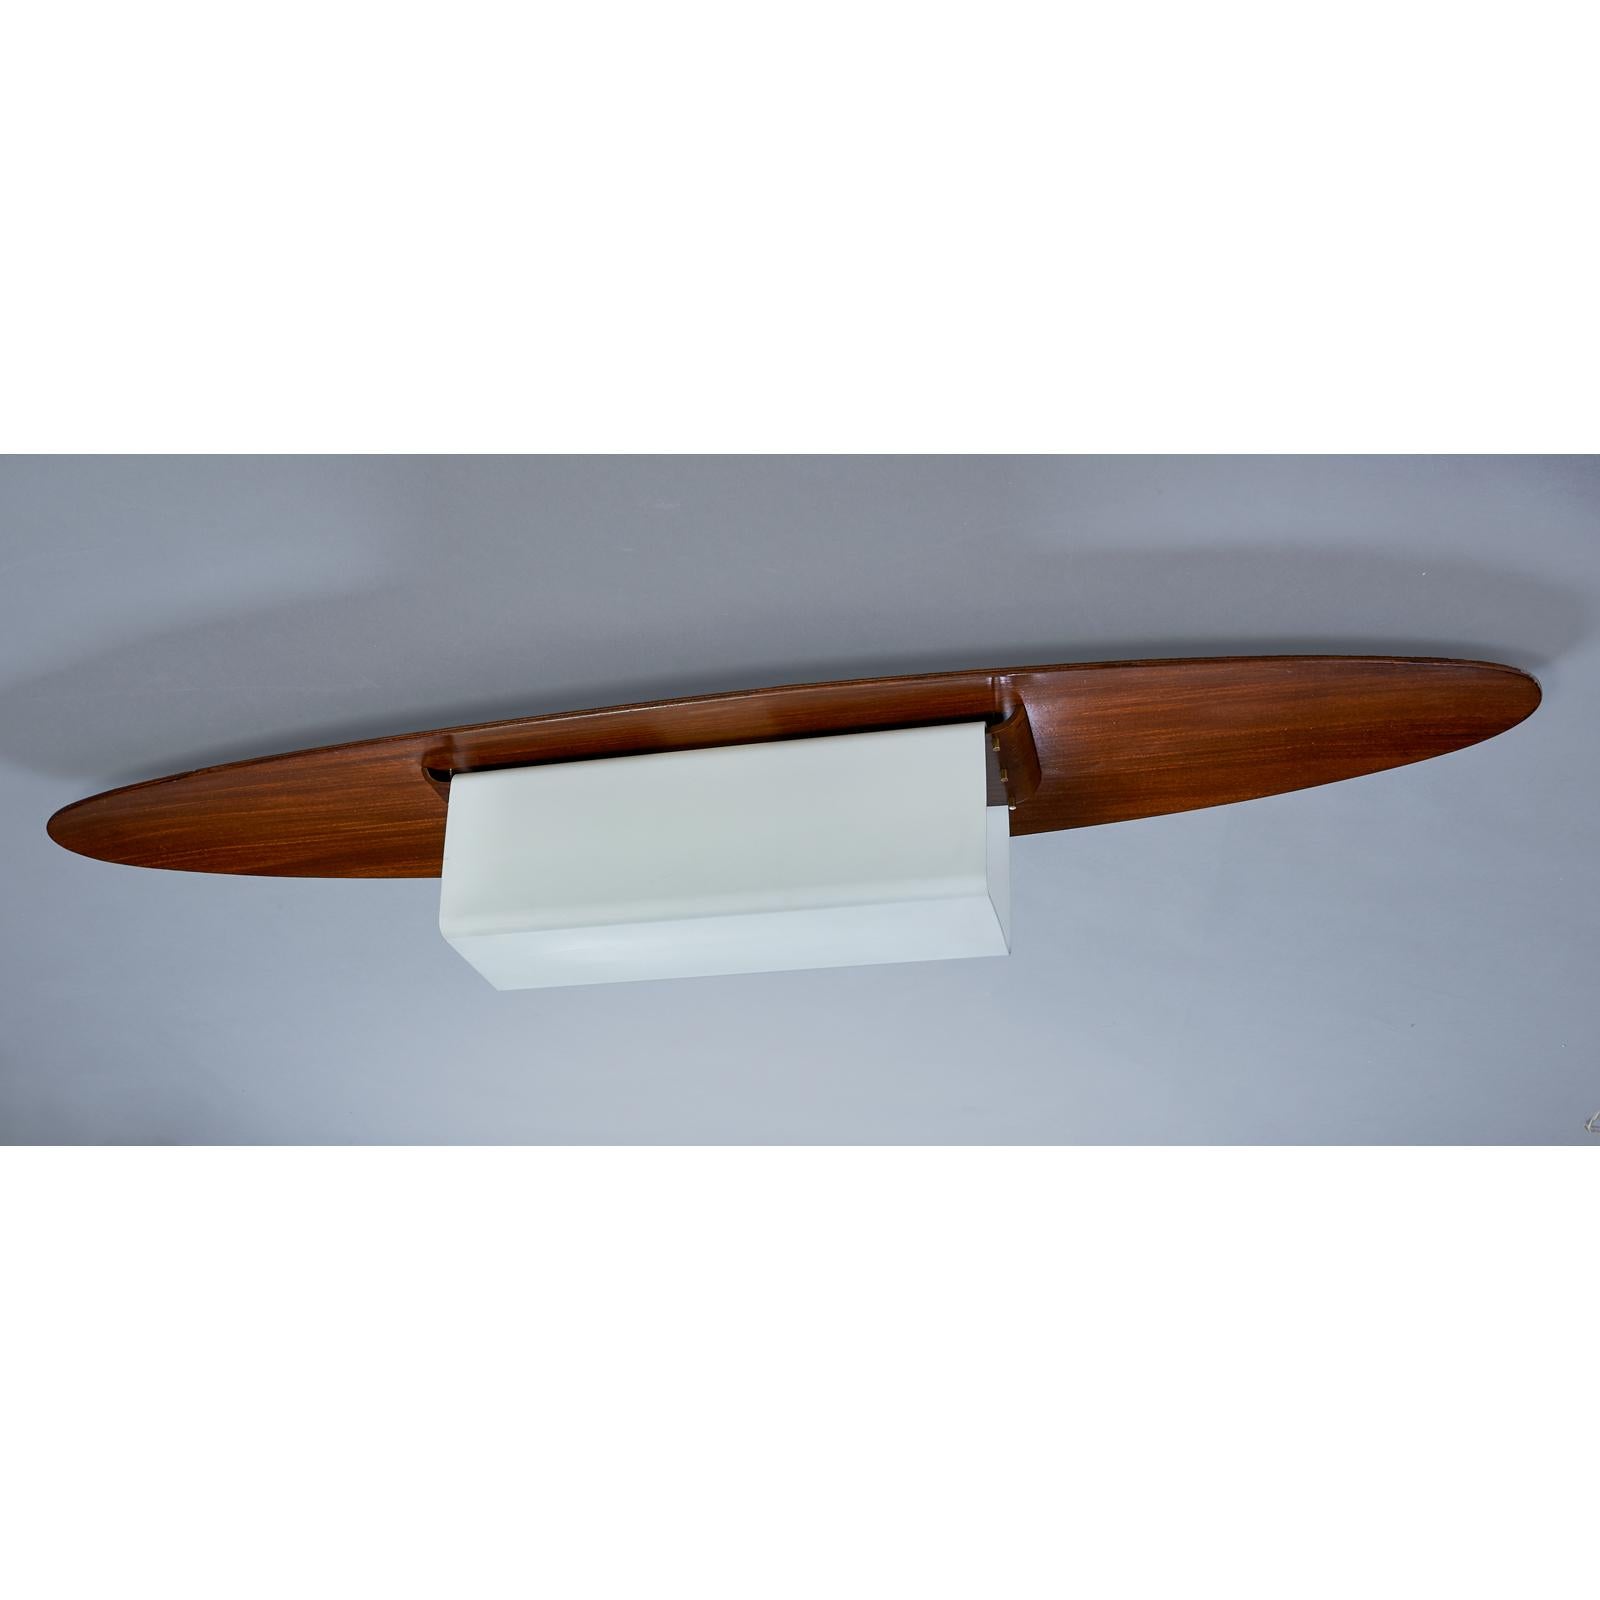 Italy, 1960s
Long oval flush mount ceiling light, opaline squared tubular lamp enclosure suspended from a gracefully curved oval polished wood canopy
Dimensions: 50 W x 12 D x 7 H
Rewired for the US with two standard base bulbs.
 